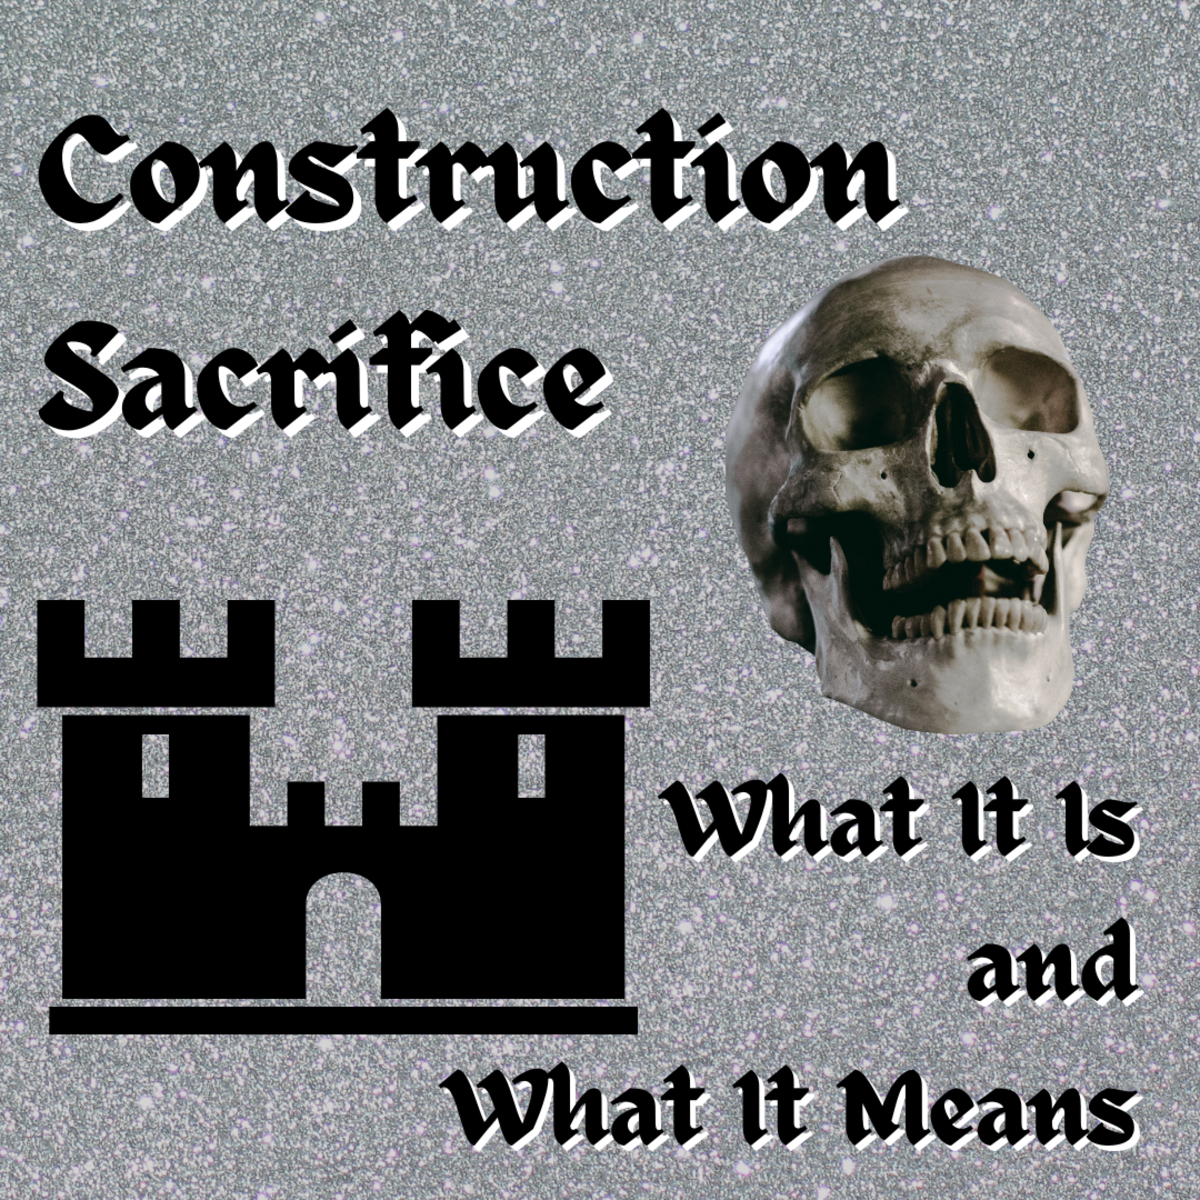 Read on to learn all about construction sacrifice, a type of human sacrifice that once occurred in many places around the world. Learn why it happened, what it means, and how it has persisted into the future in subtle ways.